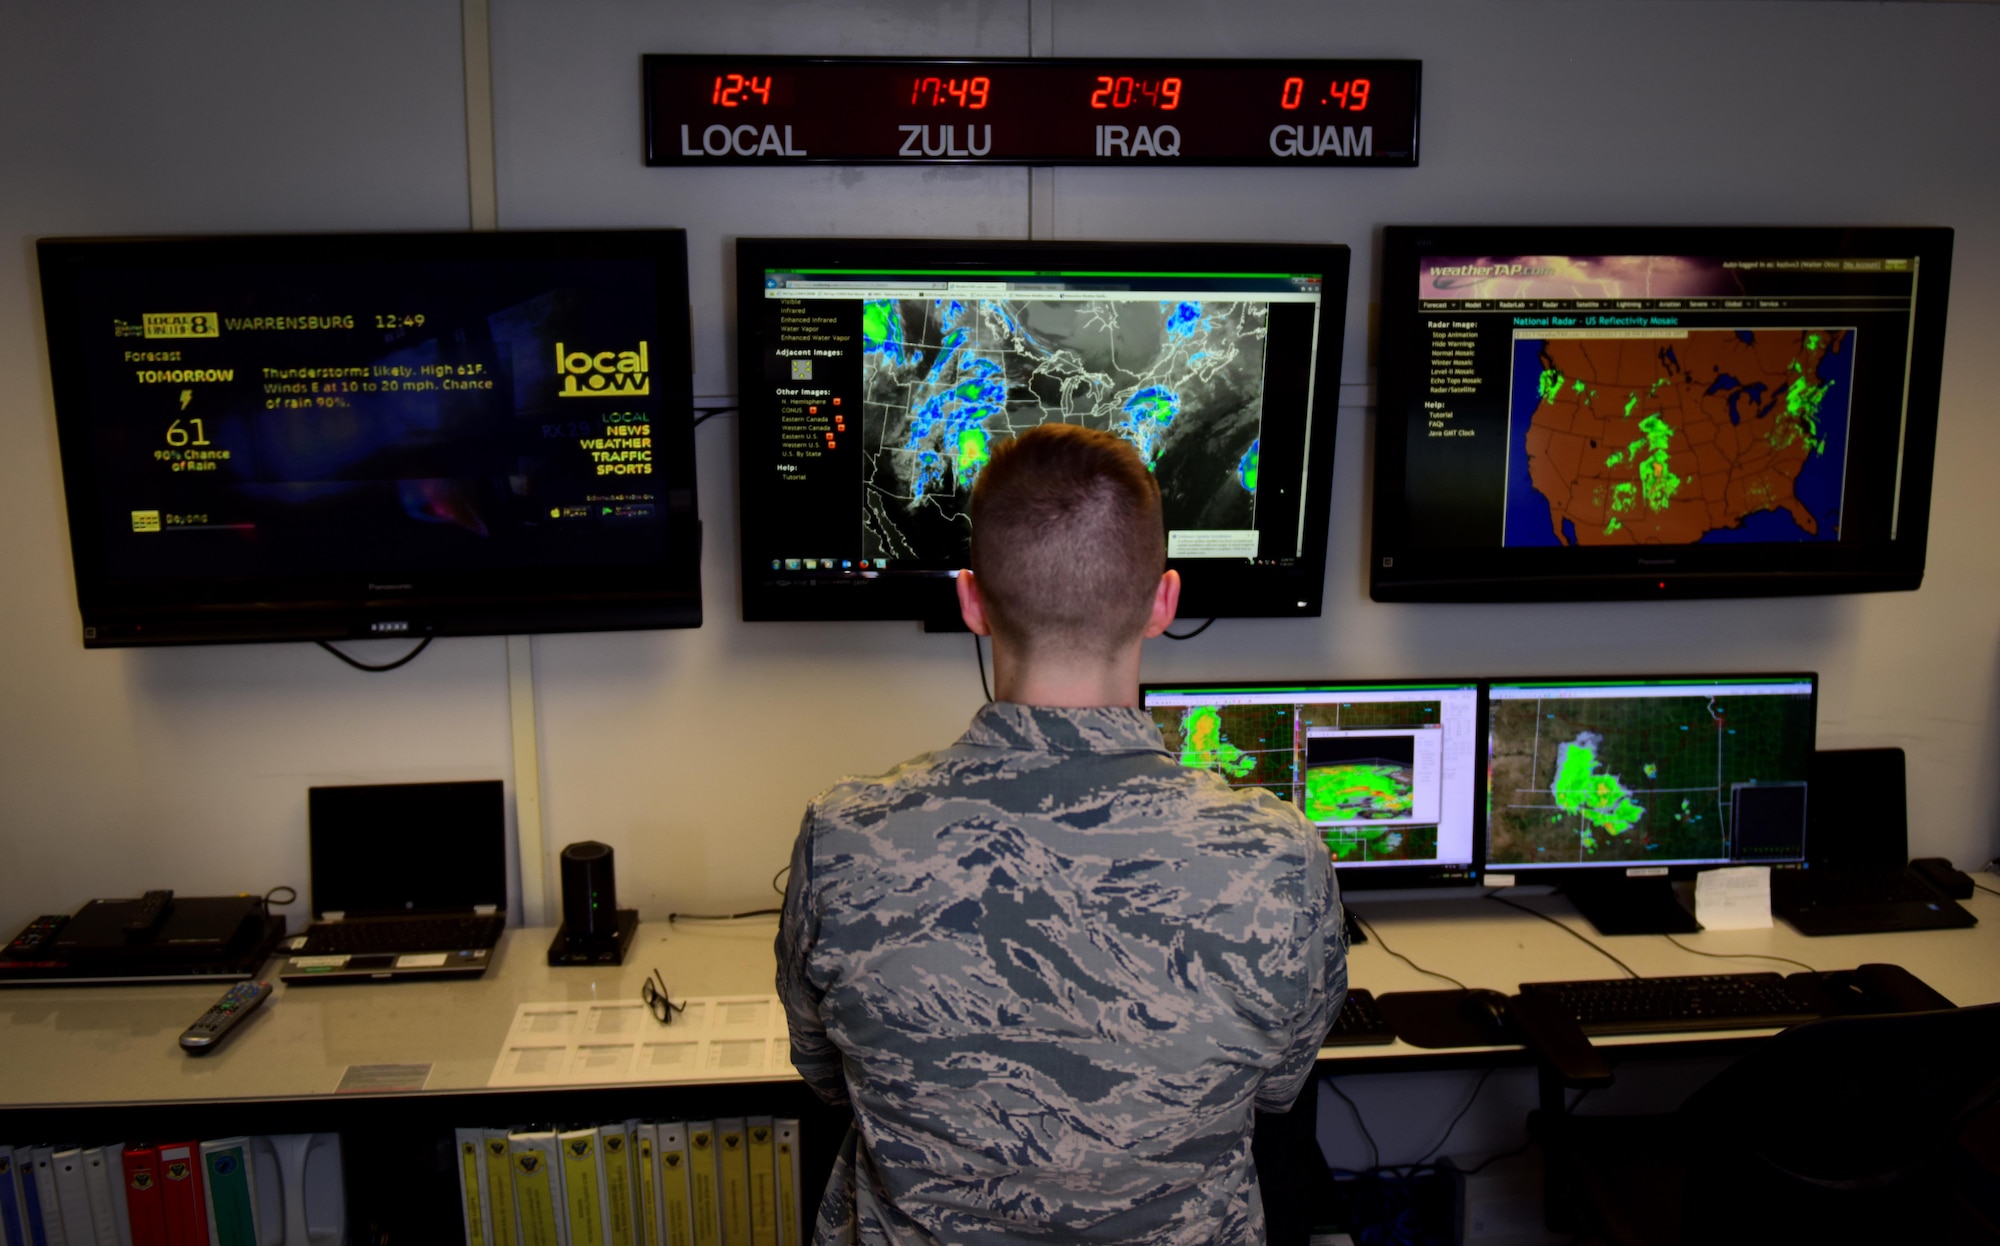 U.S. Air Force Senior Airman Alex Knowles, a weather forecaster assigned to the 509th Operations Support Squadron, studies a severe weather outbreak to see if and how it will impact base operations at Whiteman Air Force Base, Mo., March 28, 2017. All forecasters are educated in a broad spectrum of natural sciences and are current on forecast techniques, tactical equipment and data analysis. (U.S. Air Force photo by Airman 1st Class Jazmin Smith)